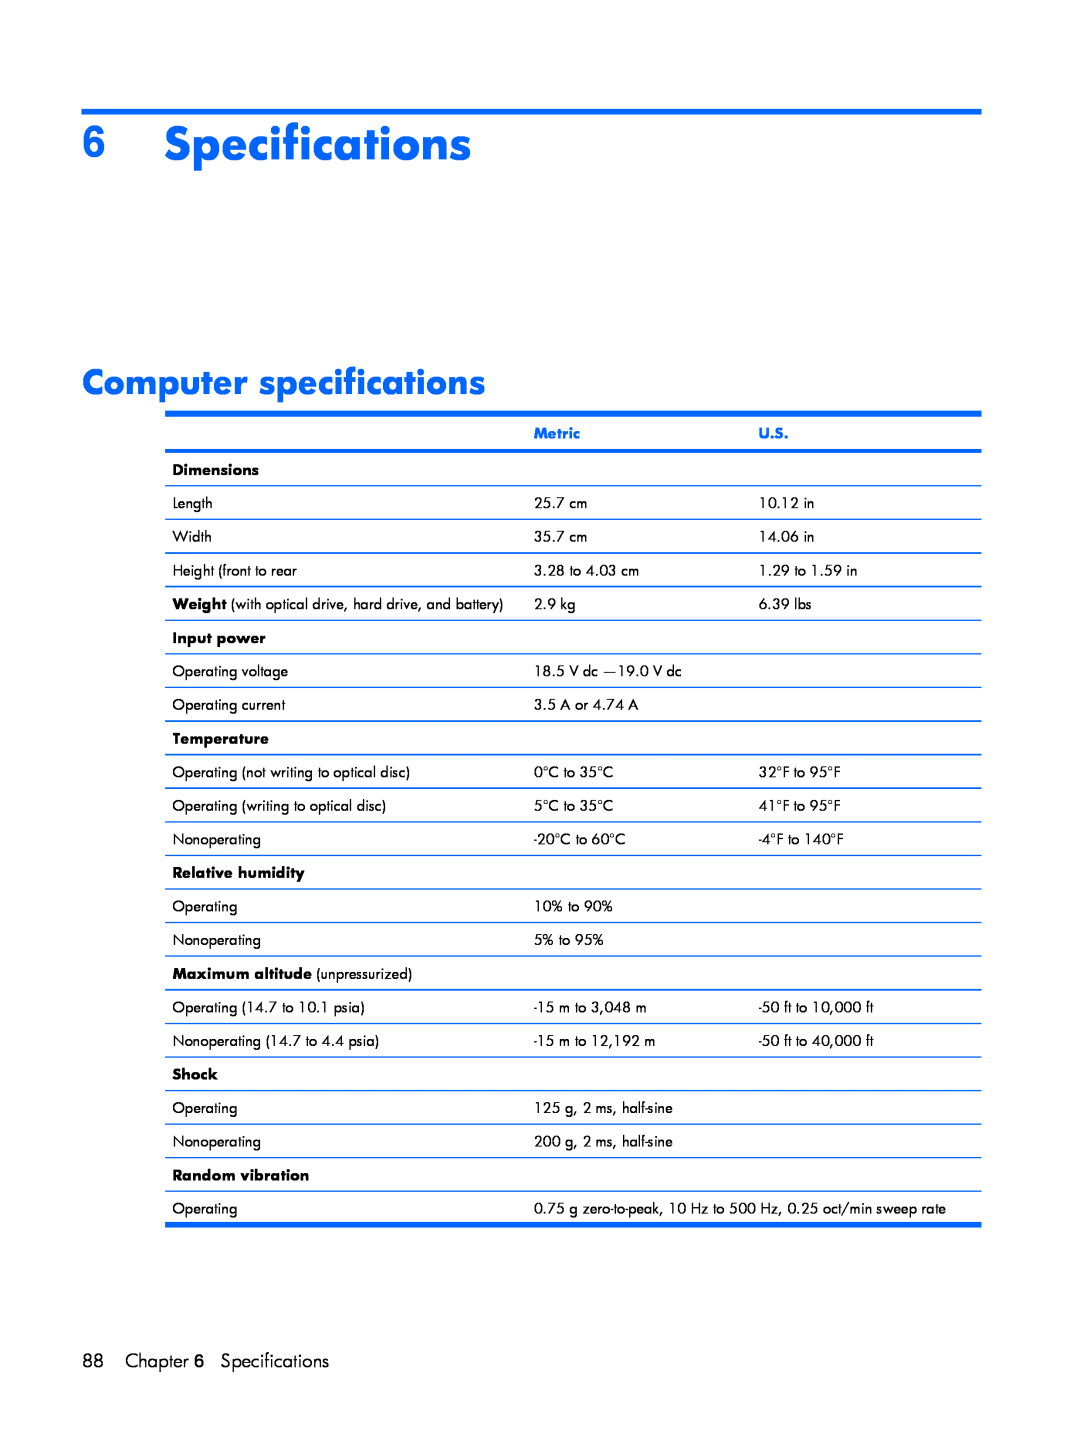 HP C710BR Specifications, Computer specifications, Metric, Dimensions, Input power, Temperature, Relative humidity, Shock 